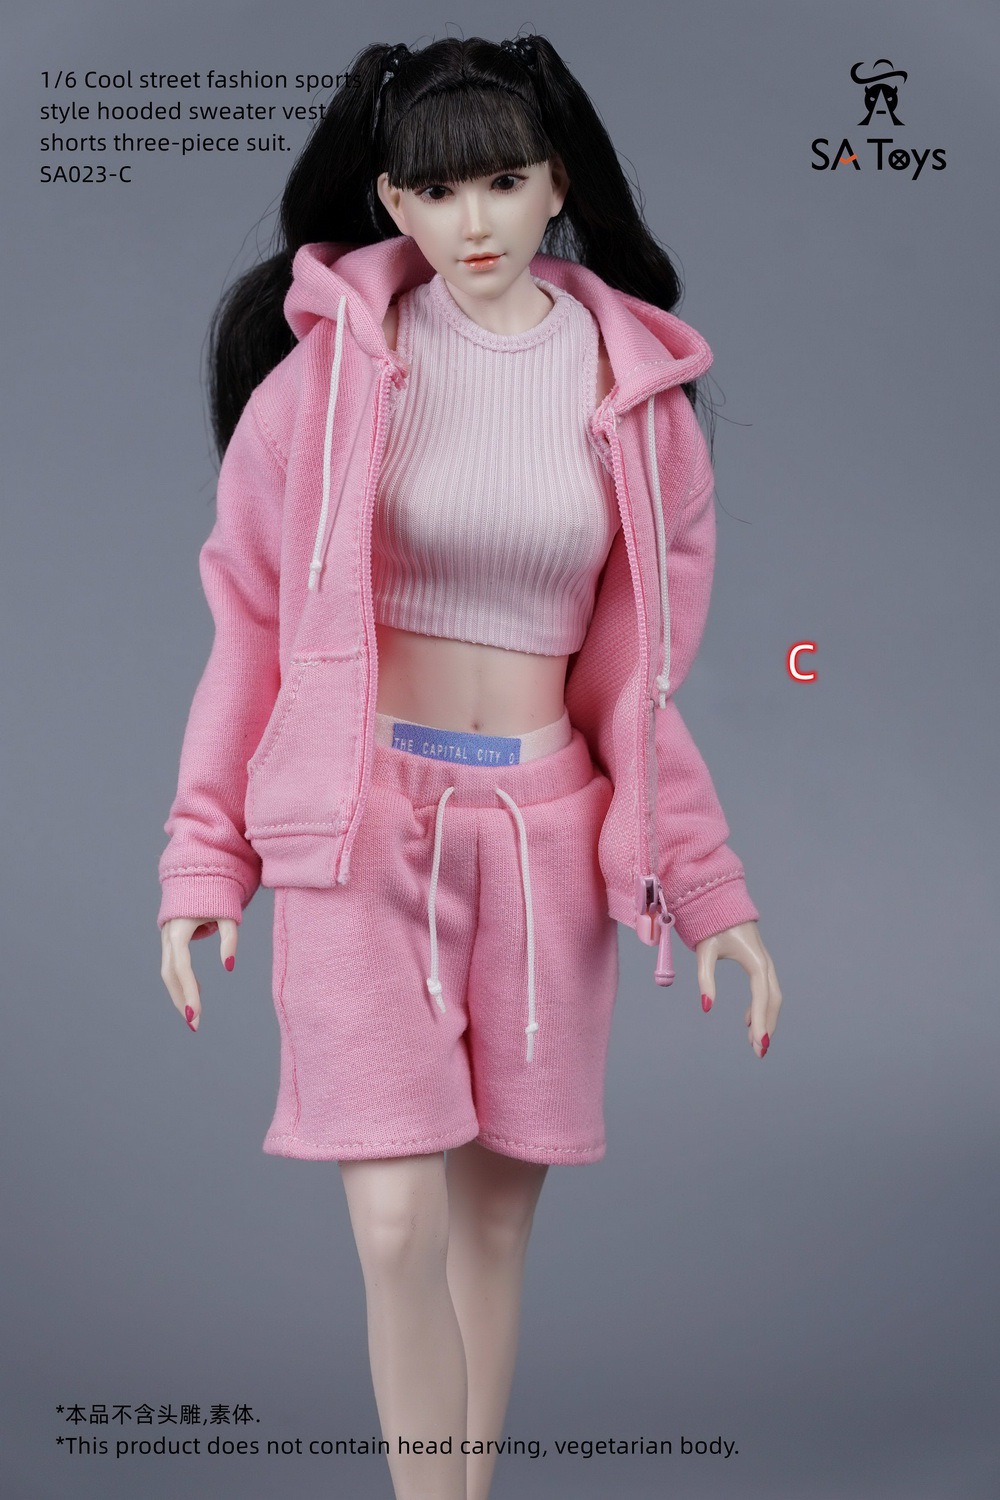 hipskirt - NEW PRODUCT: SA Toys: 1/6 hip skirt / floral elastic skirt / fashionable sports style hooded sweater cover, hip-hop fisherman hat halter and footwear casual pants [variety optional] 17021510